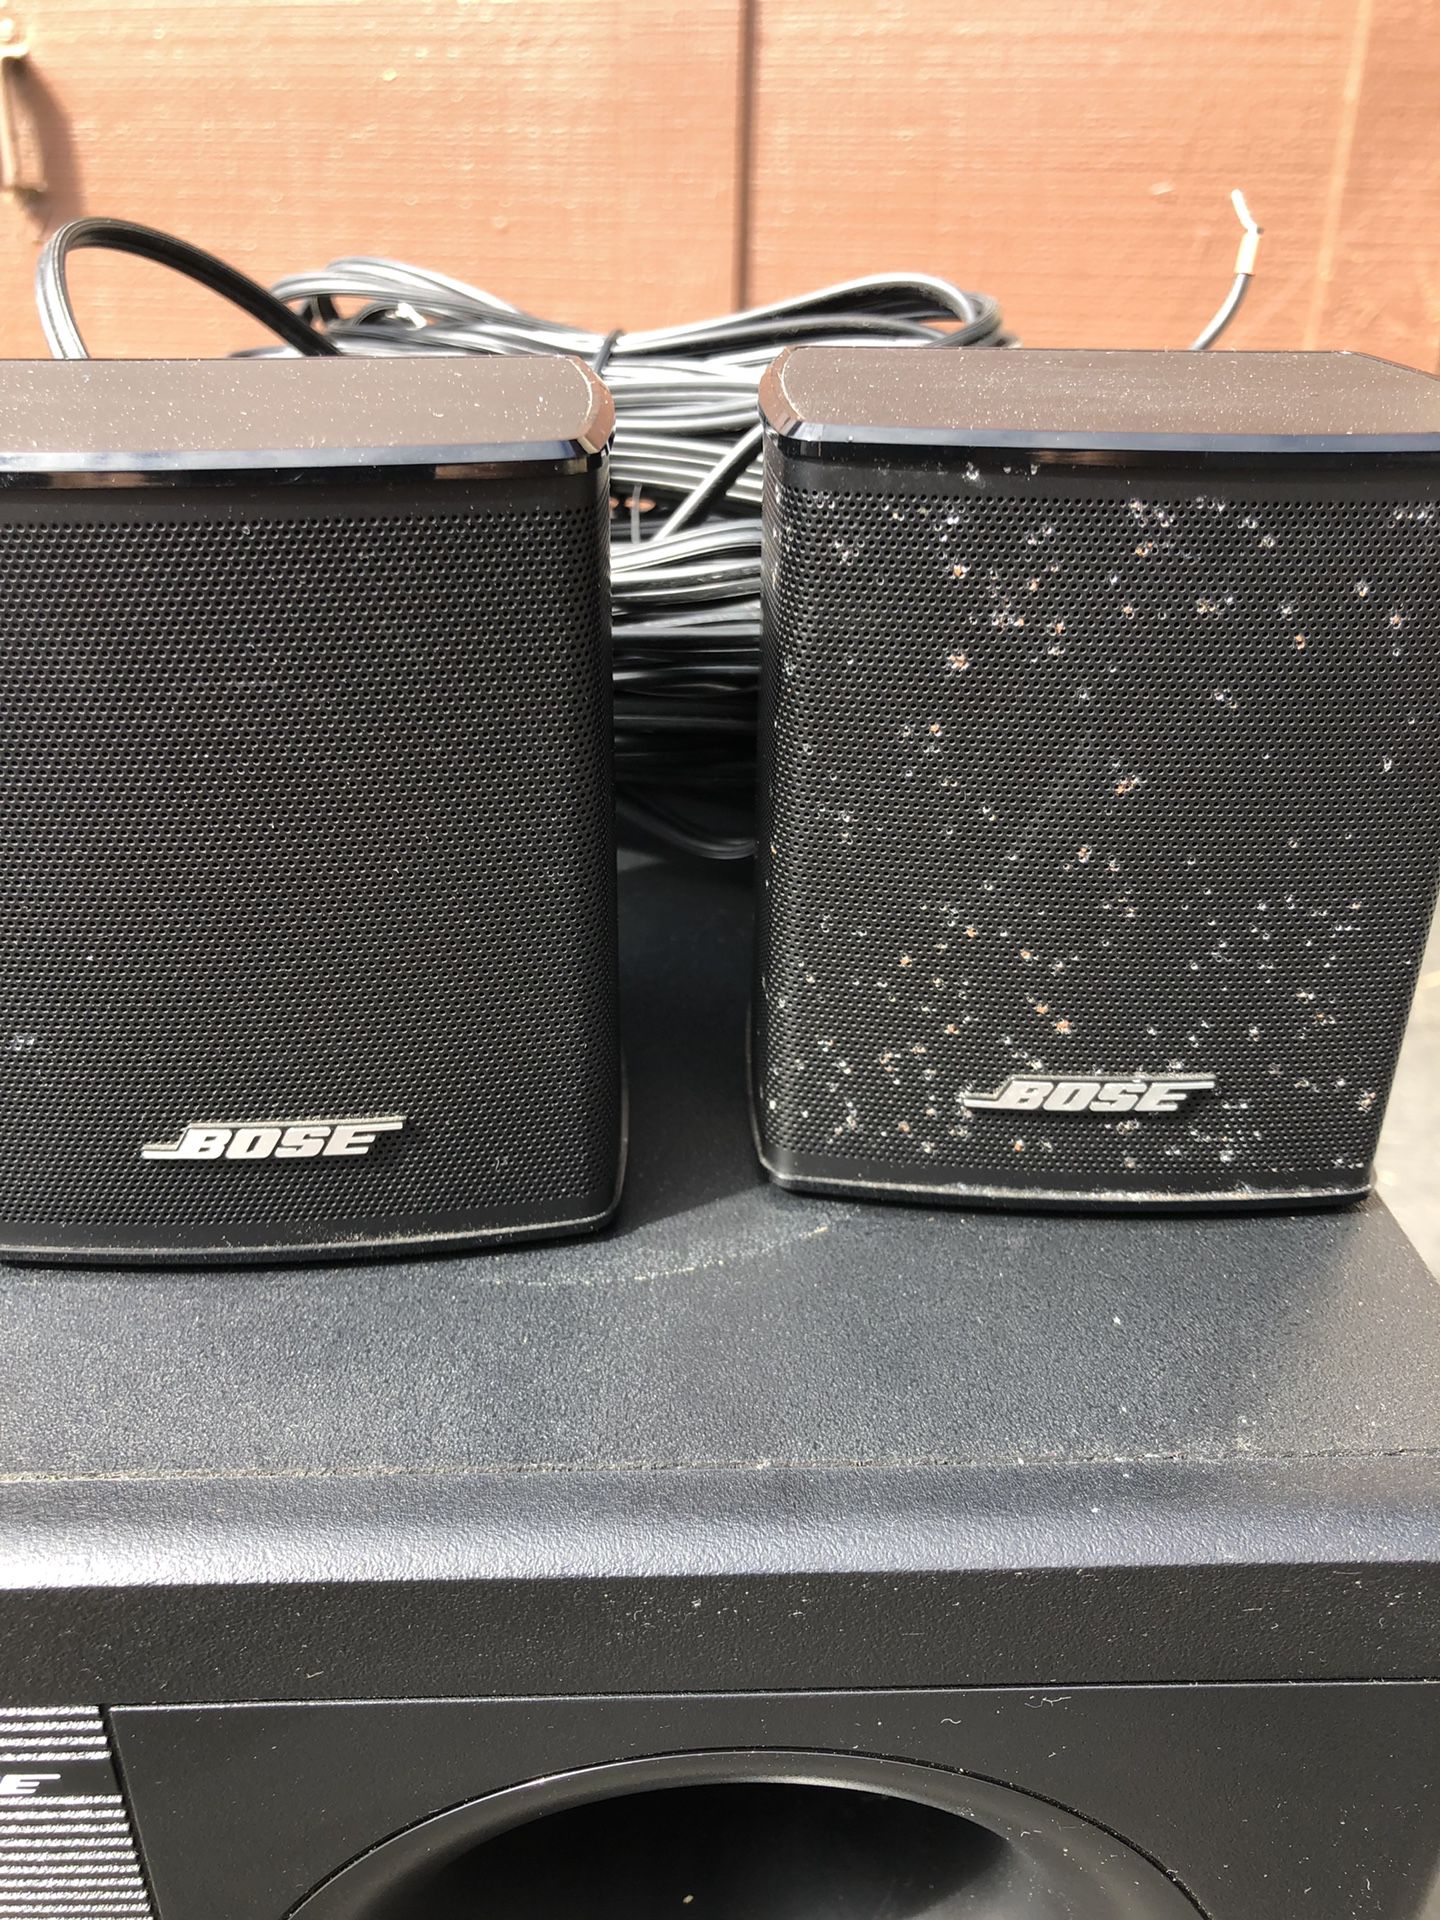 Bose acoustimass speaker system with subwoofer